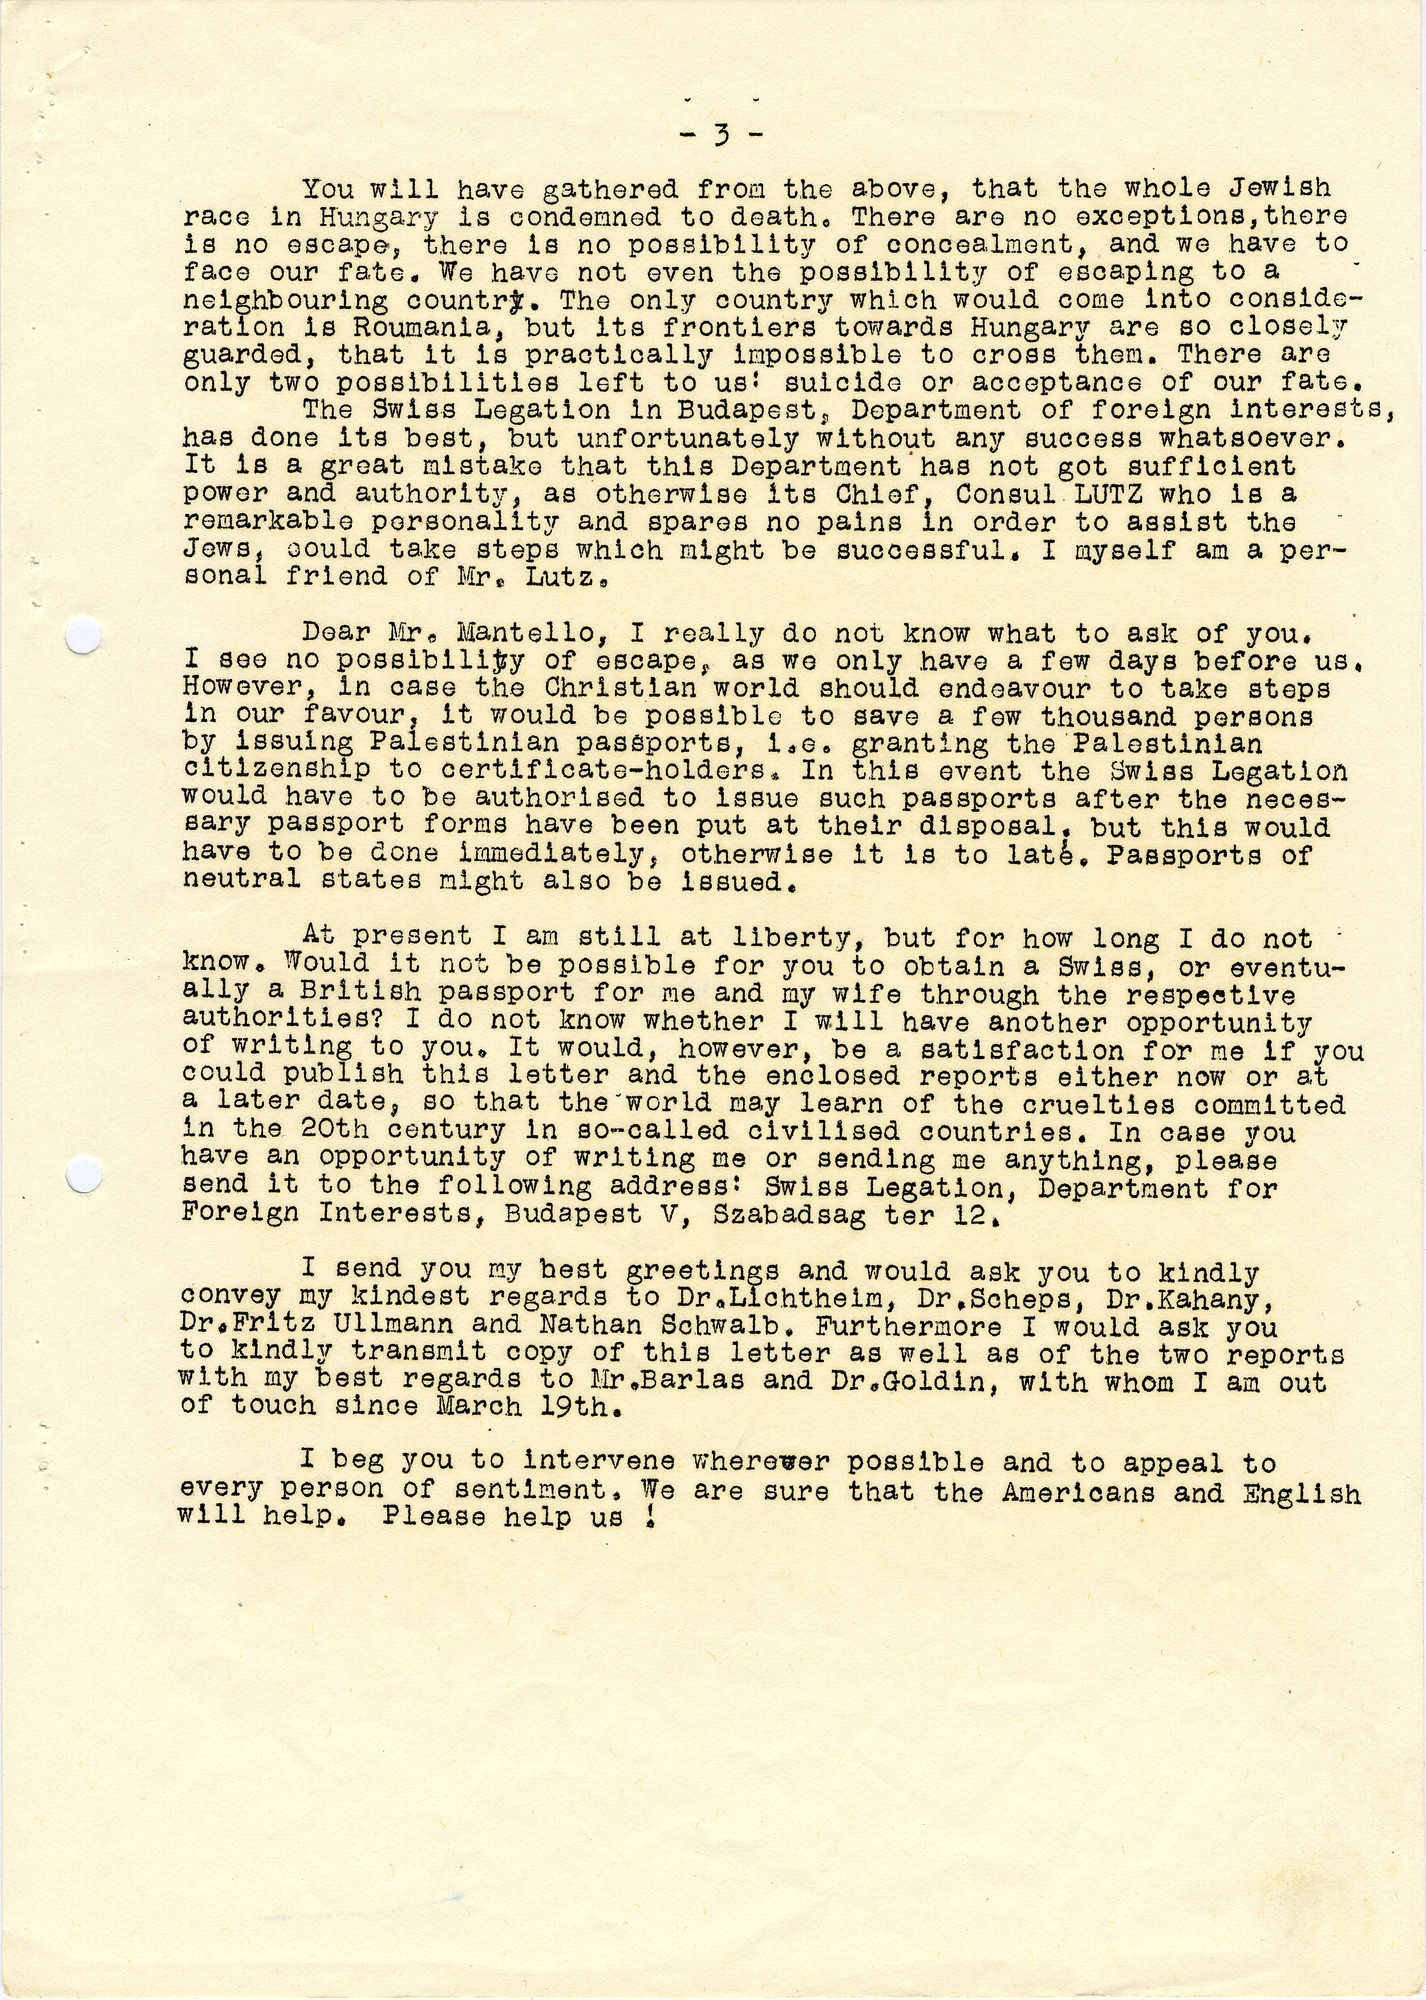 Letter describing the situation of the Jews in Hungary written by Miklos Kraus and appended to an abridged copy of the Auschwitz Protocol.

The document was translated into English by students hired by George Mandel-Mantello.